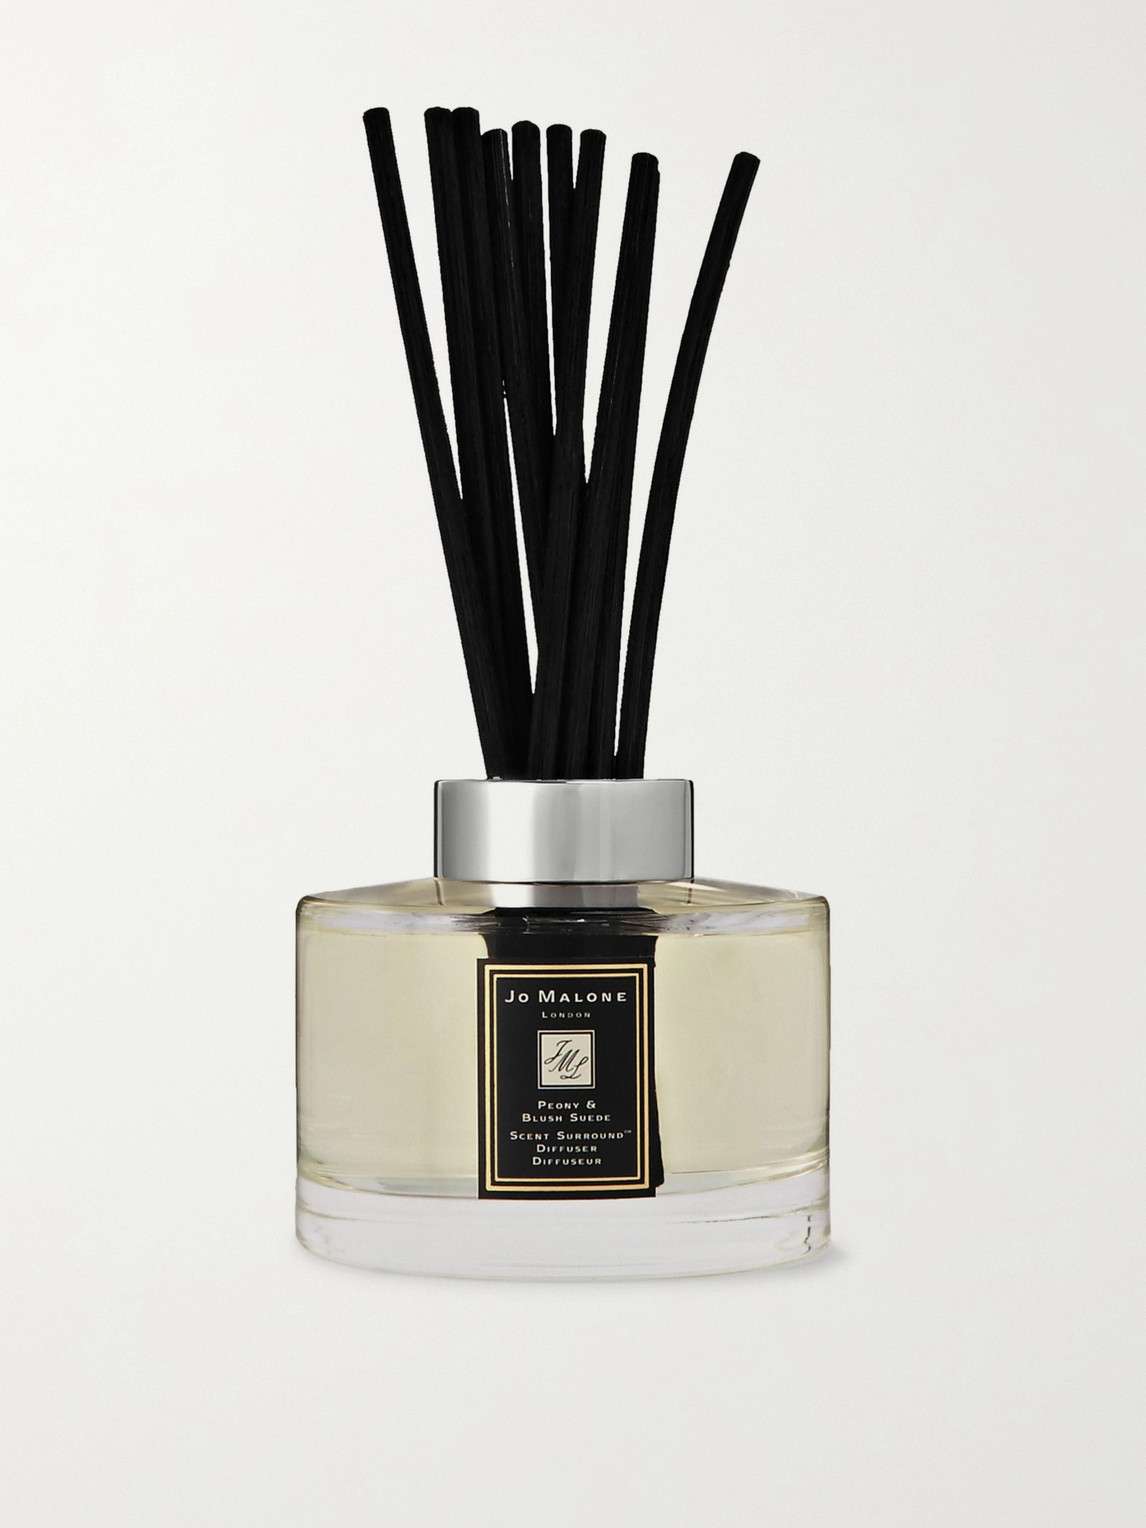 Jo Malone London Peony And Blush Suede Scent Surround Diffuser In Colorless